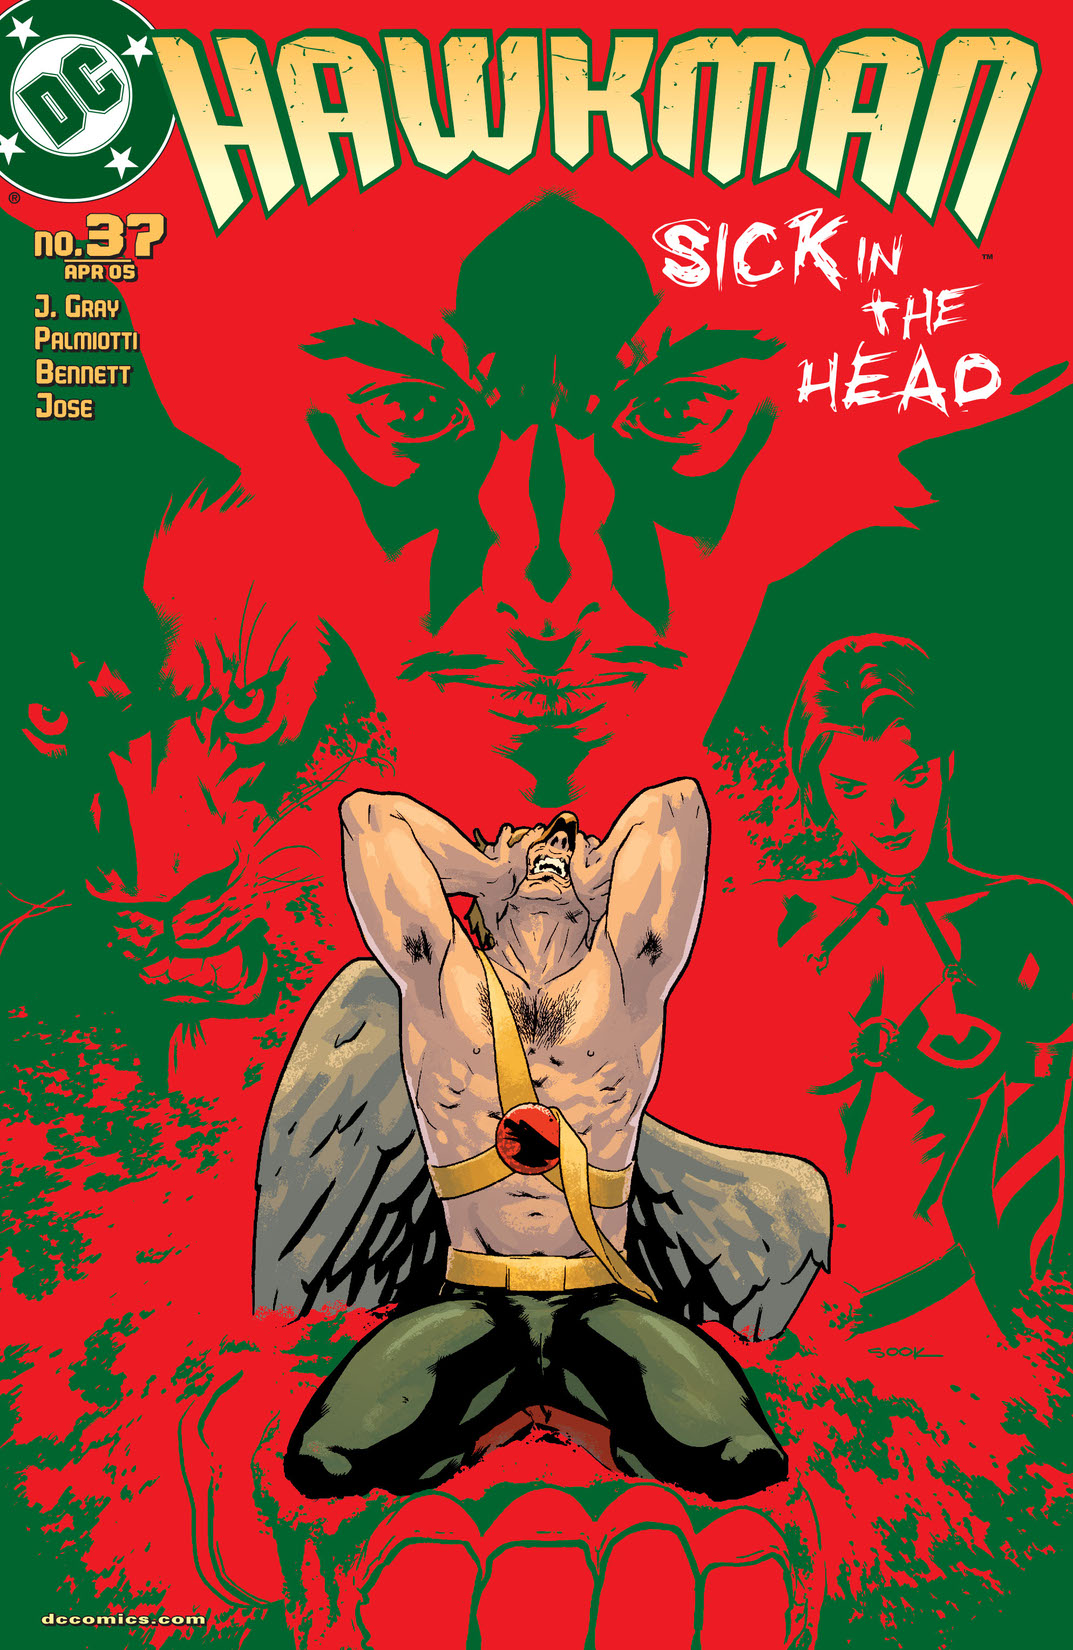 Hawkman (2002-) #37 preview images